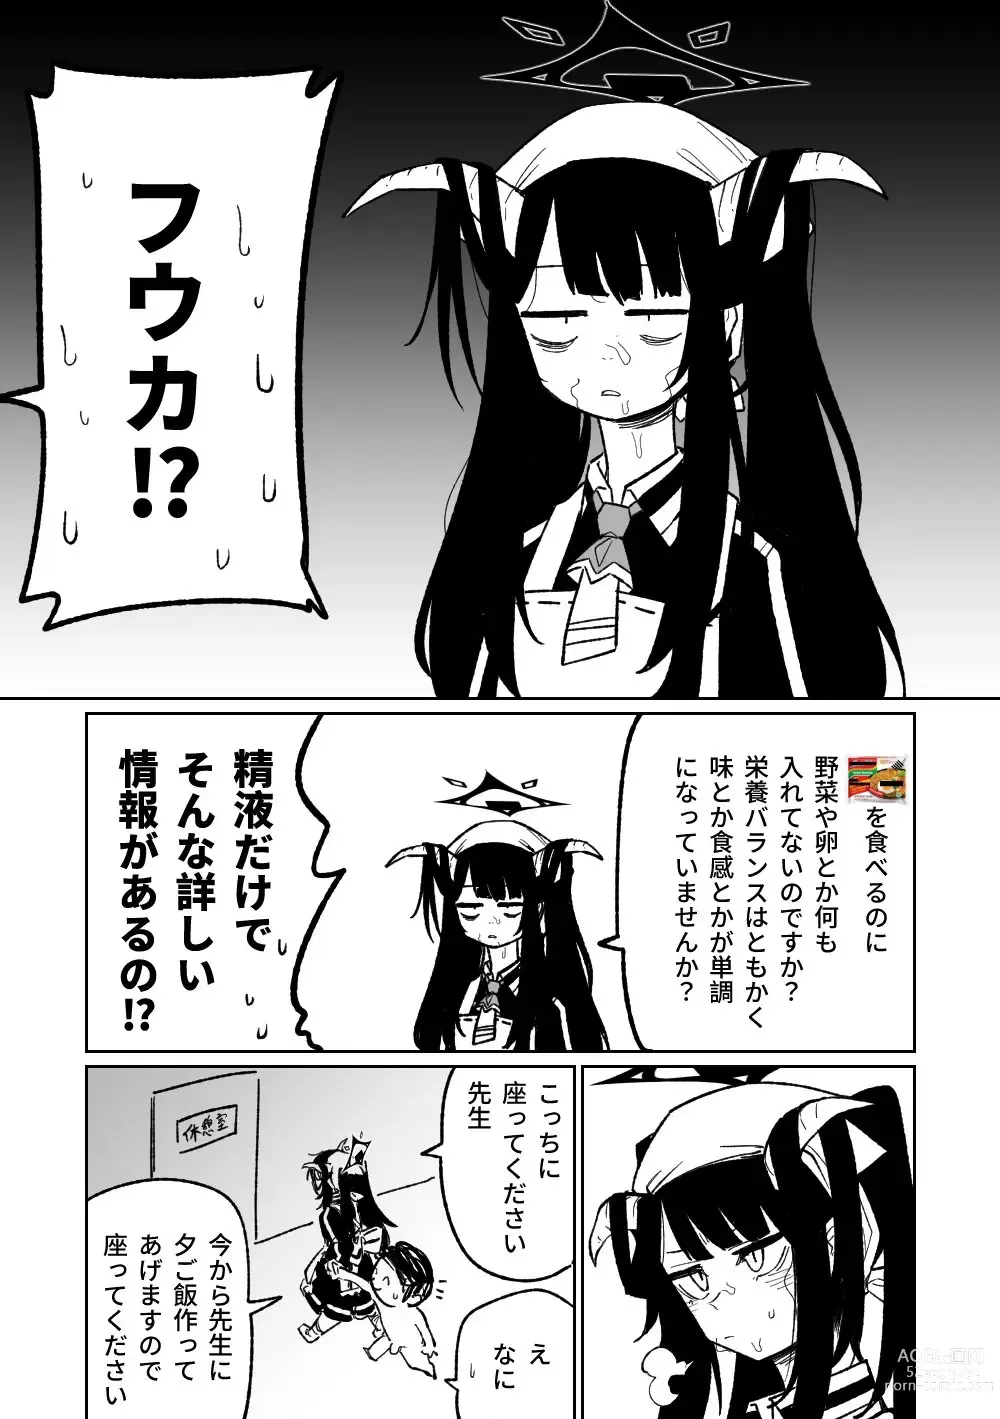 Page 8 of doujinshi 風華的飲食管理